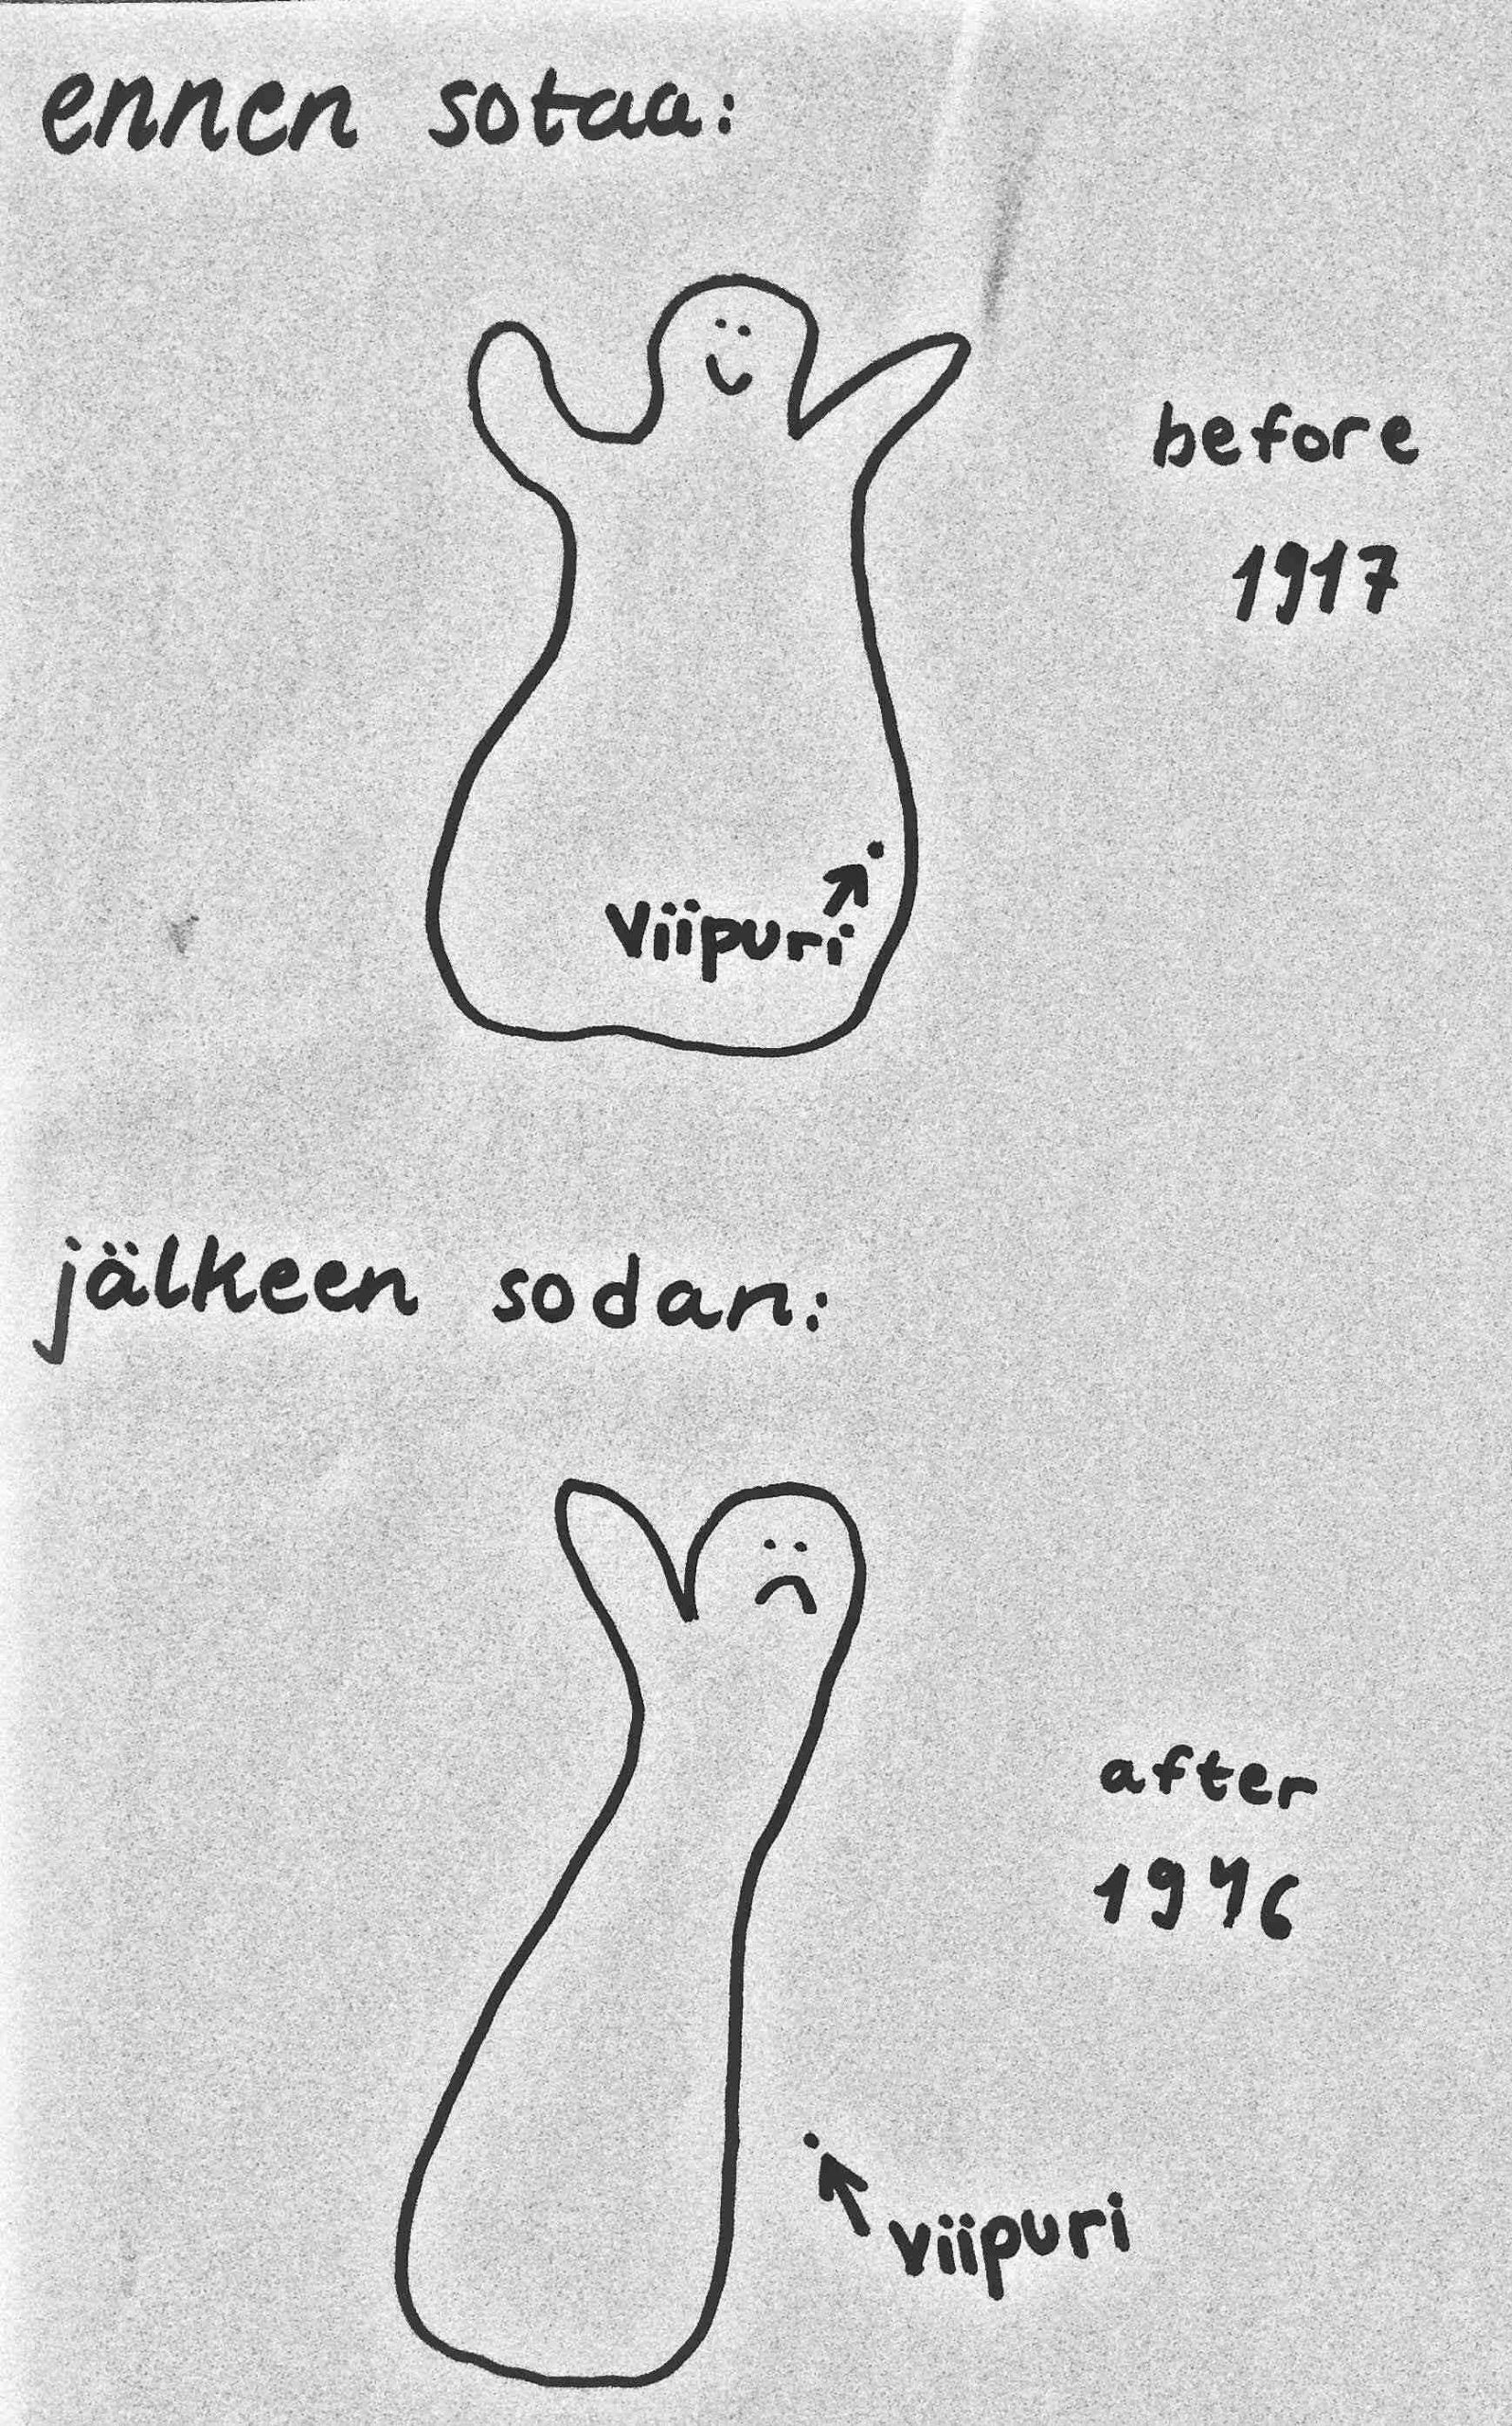 Drawing: First, map of Finland pictured as a laughing body with both arms. Second, map of Finland pictured as a sad and slimmer body, only with one arm. Viborg included in Finland in the first map, in the second map, marked outside the eastern border.